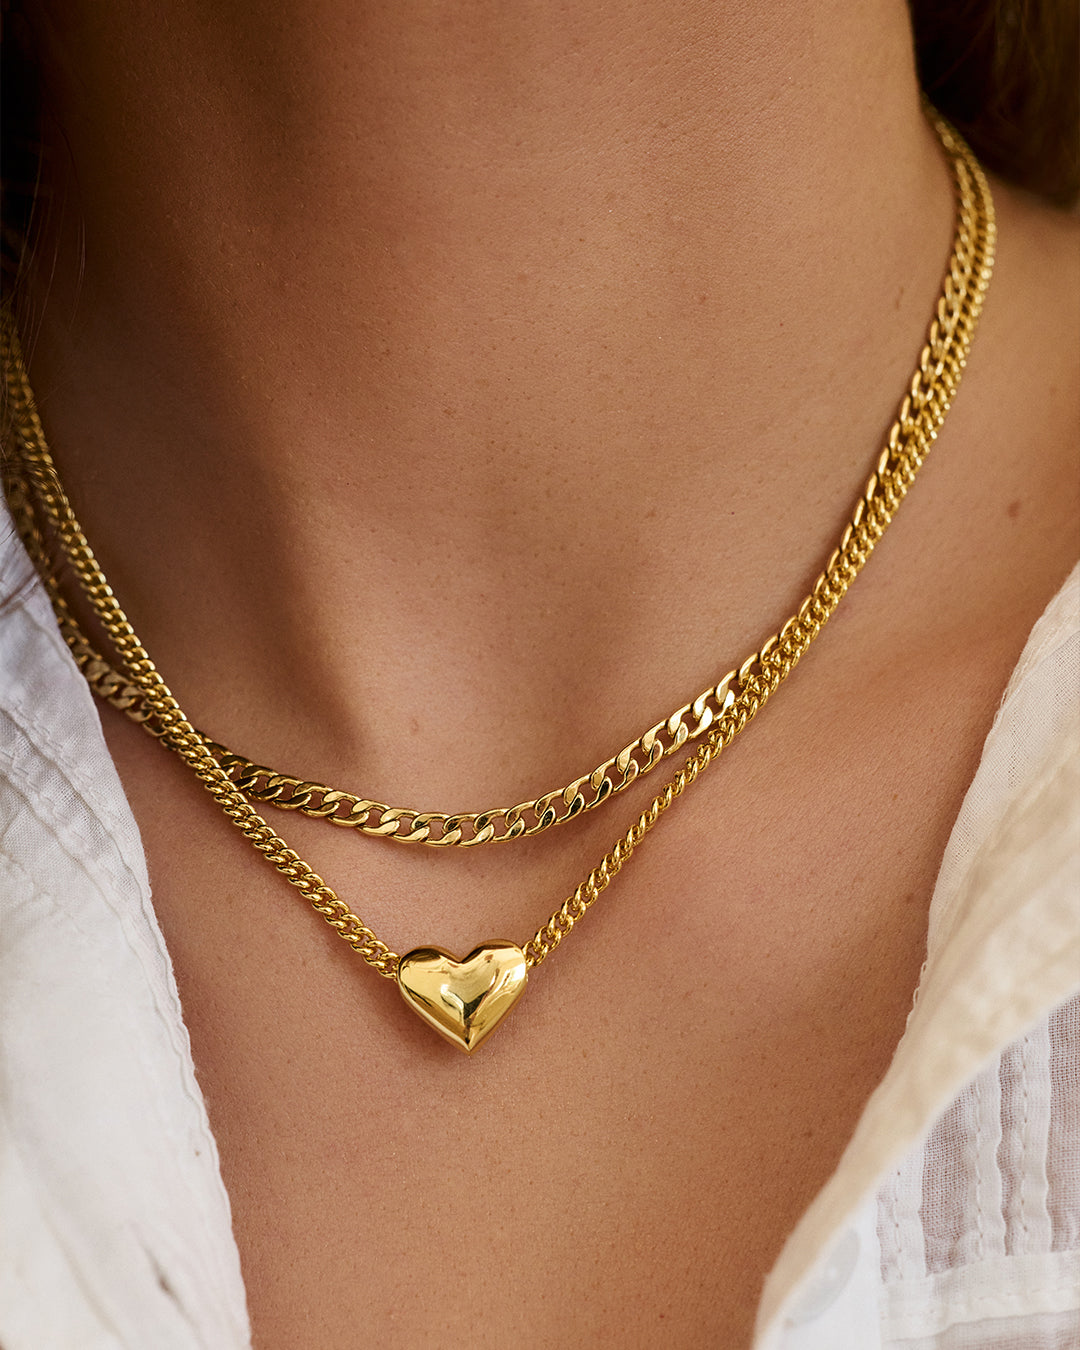 Lou Heart Charm Necklace || option::Gold Plated